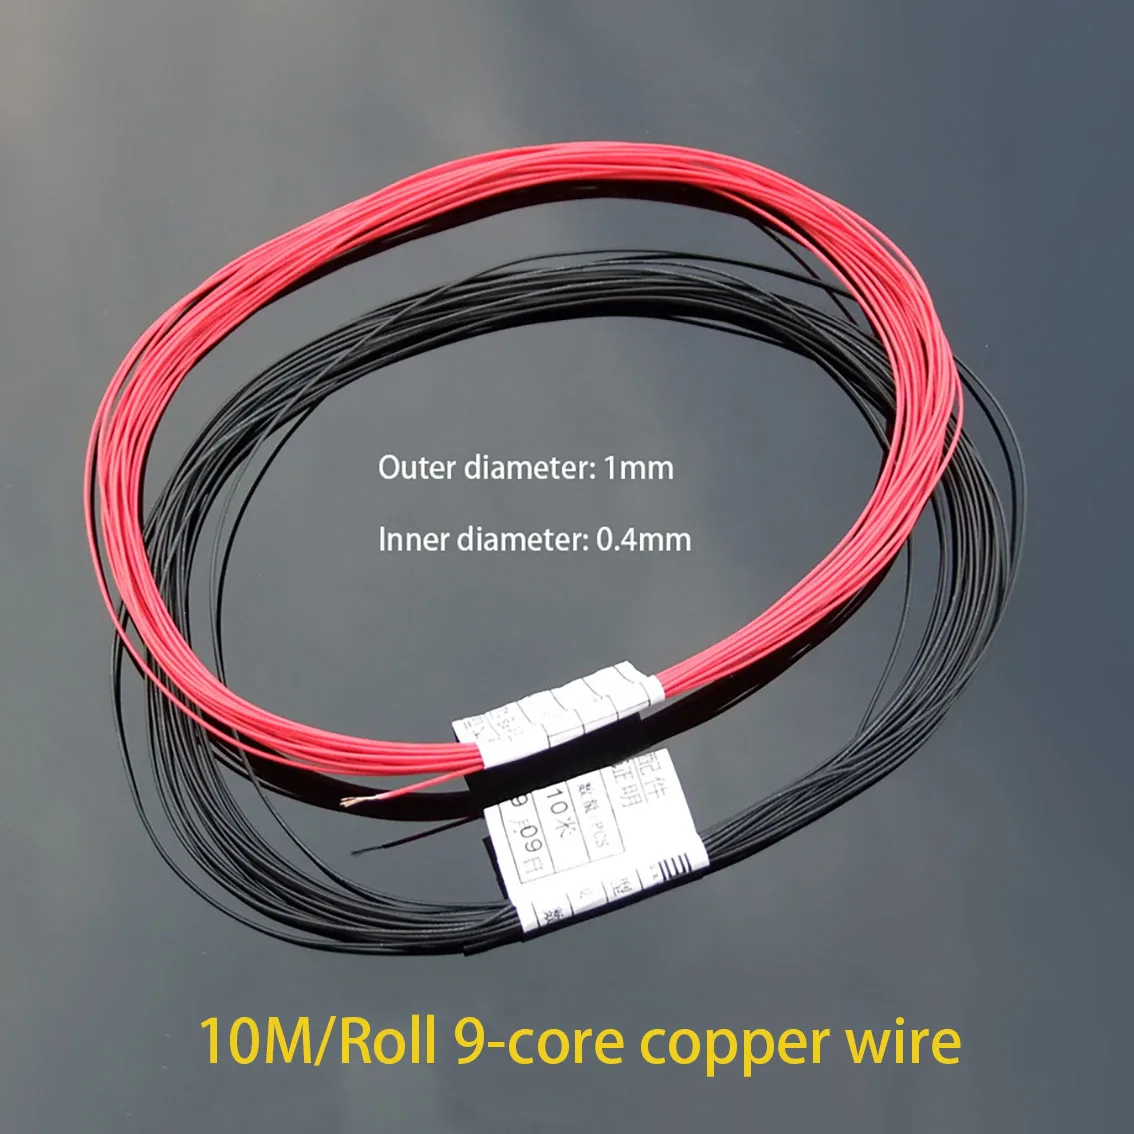 

10M/Roll Red/Black 9-core Copper Wire Thin Wire DIY Handmade Model Making Accessories Wire Outer Diameter 1mm